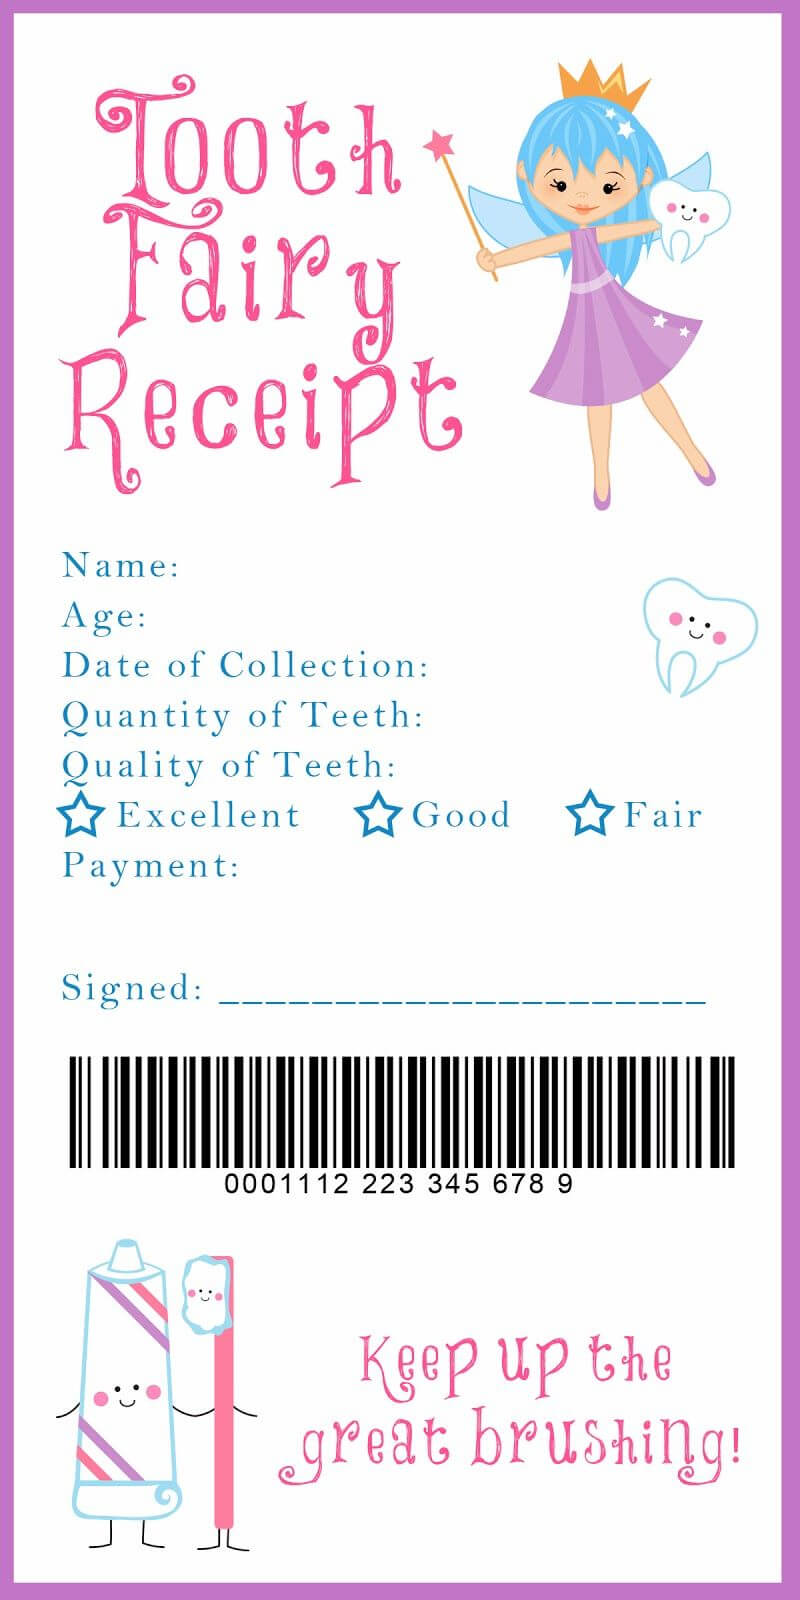 Tooth Fairy Receipt Printable. Such A Cute Idea! | Tooth Regarding Free Tooth Fairy Certificate Template